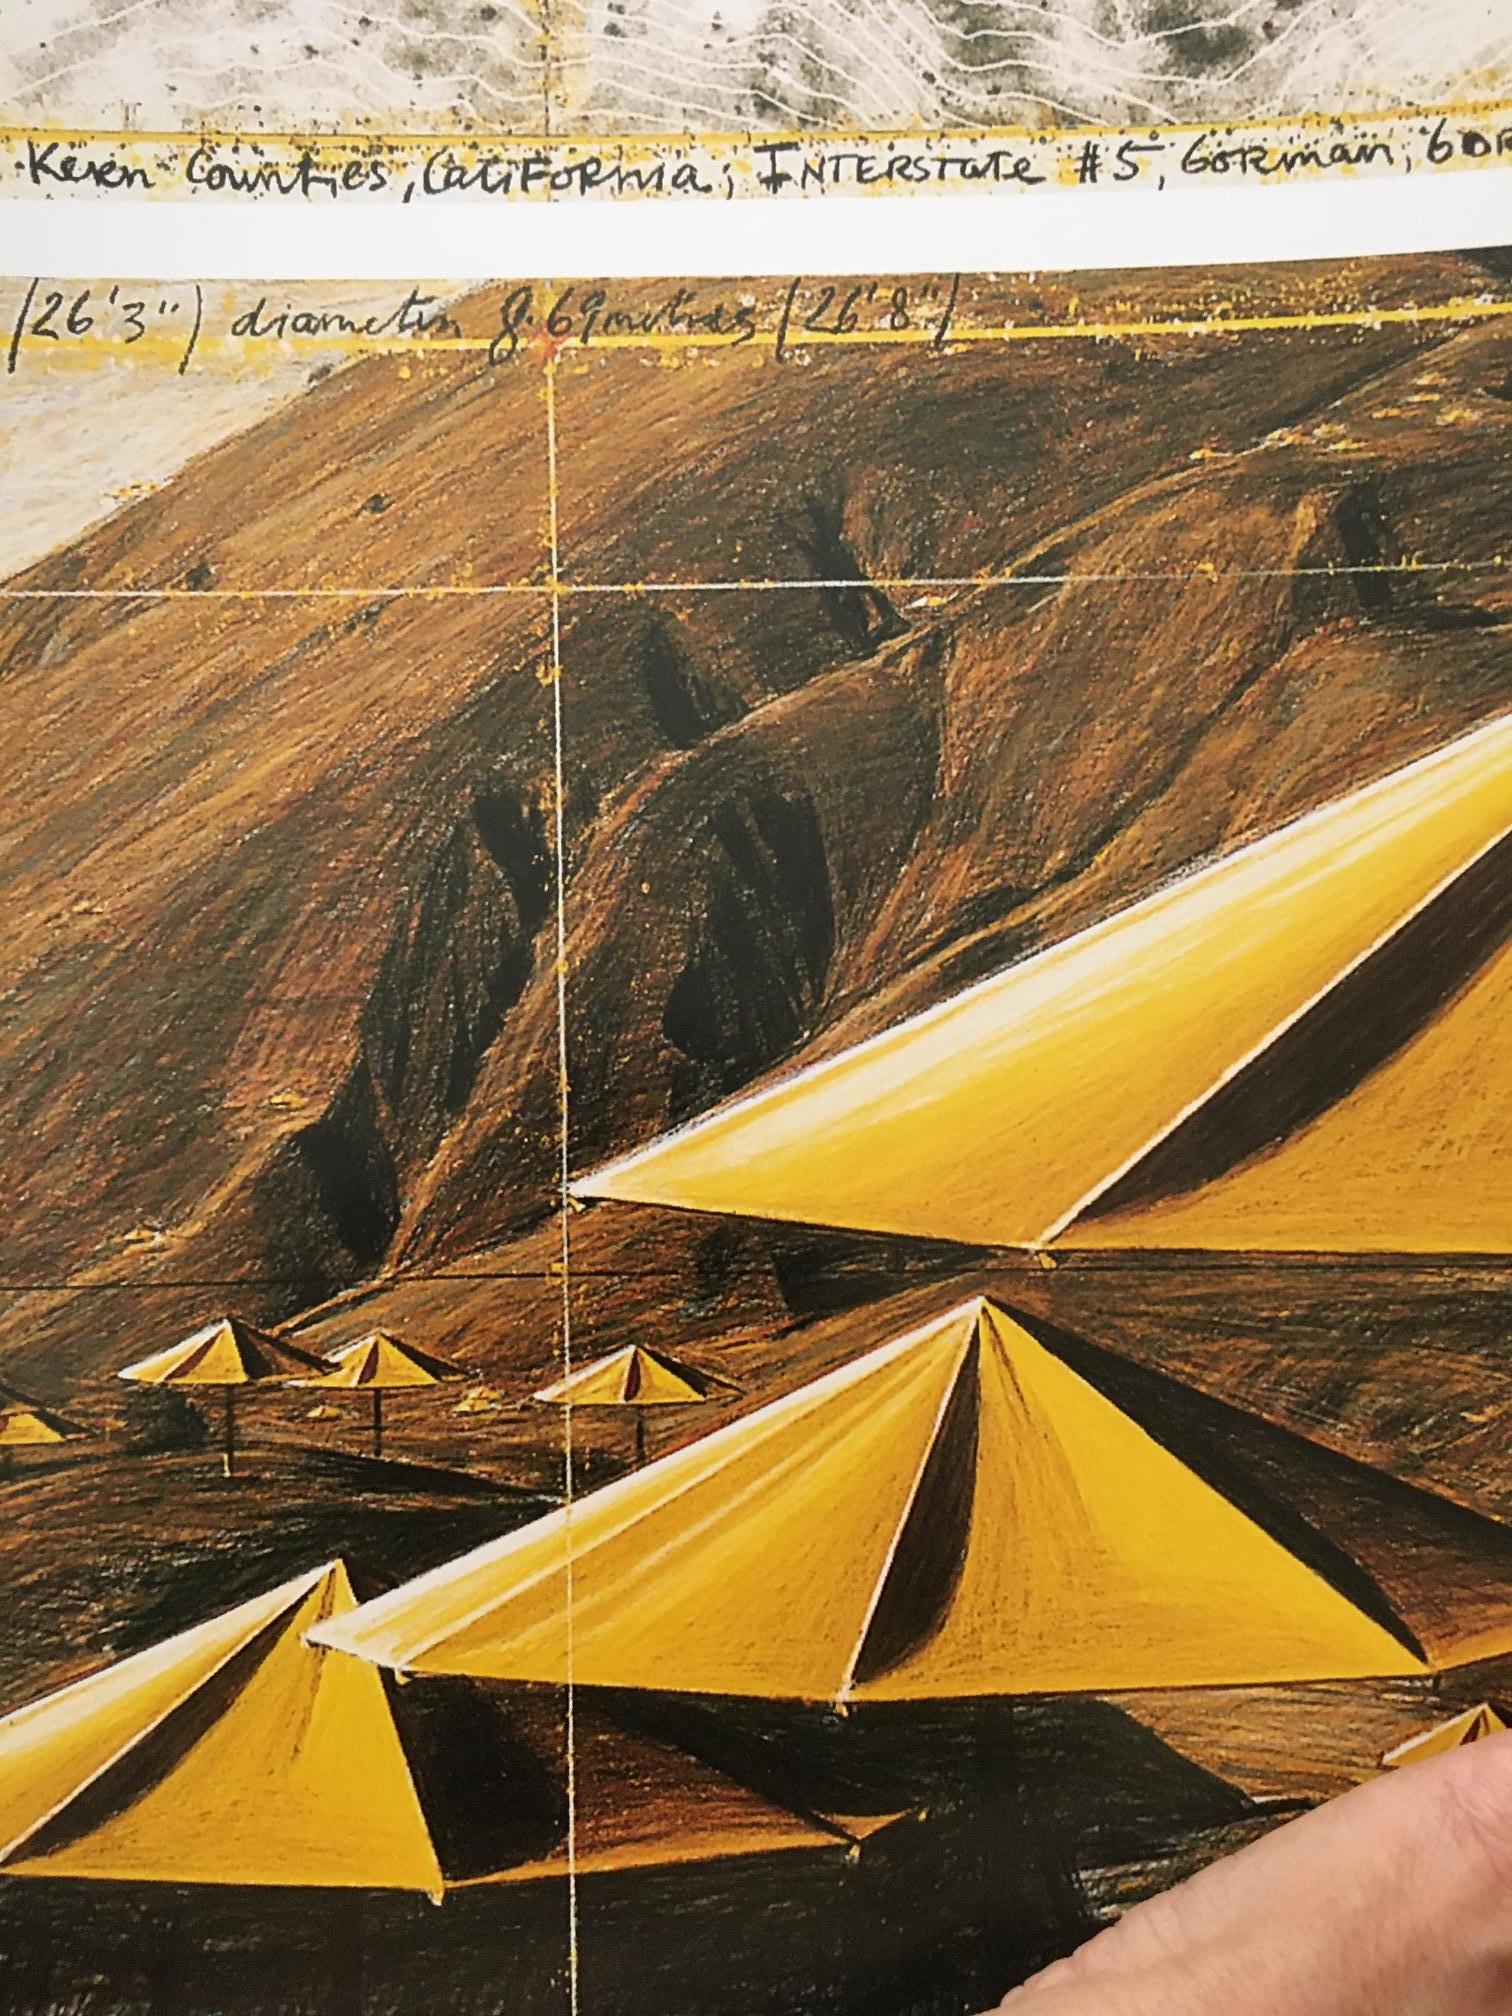 Christo (Bulgarian, 1935-2020)
The Umbrellas (Joint Project for Japan and USA), 1991 (Yellow)
Offset lithograph on wove paper, 
Signed in crayon lower left
Printed by Schumacher Edition Fils, Dusseldorf, Germany
Sheet (unframed): 19.75